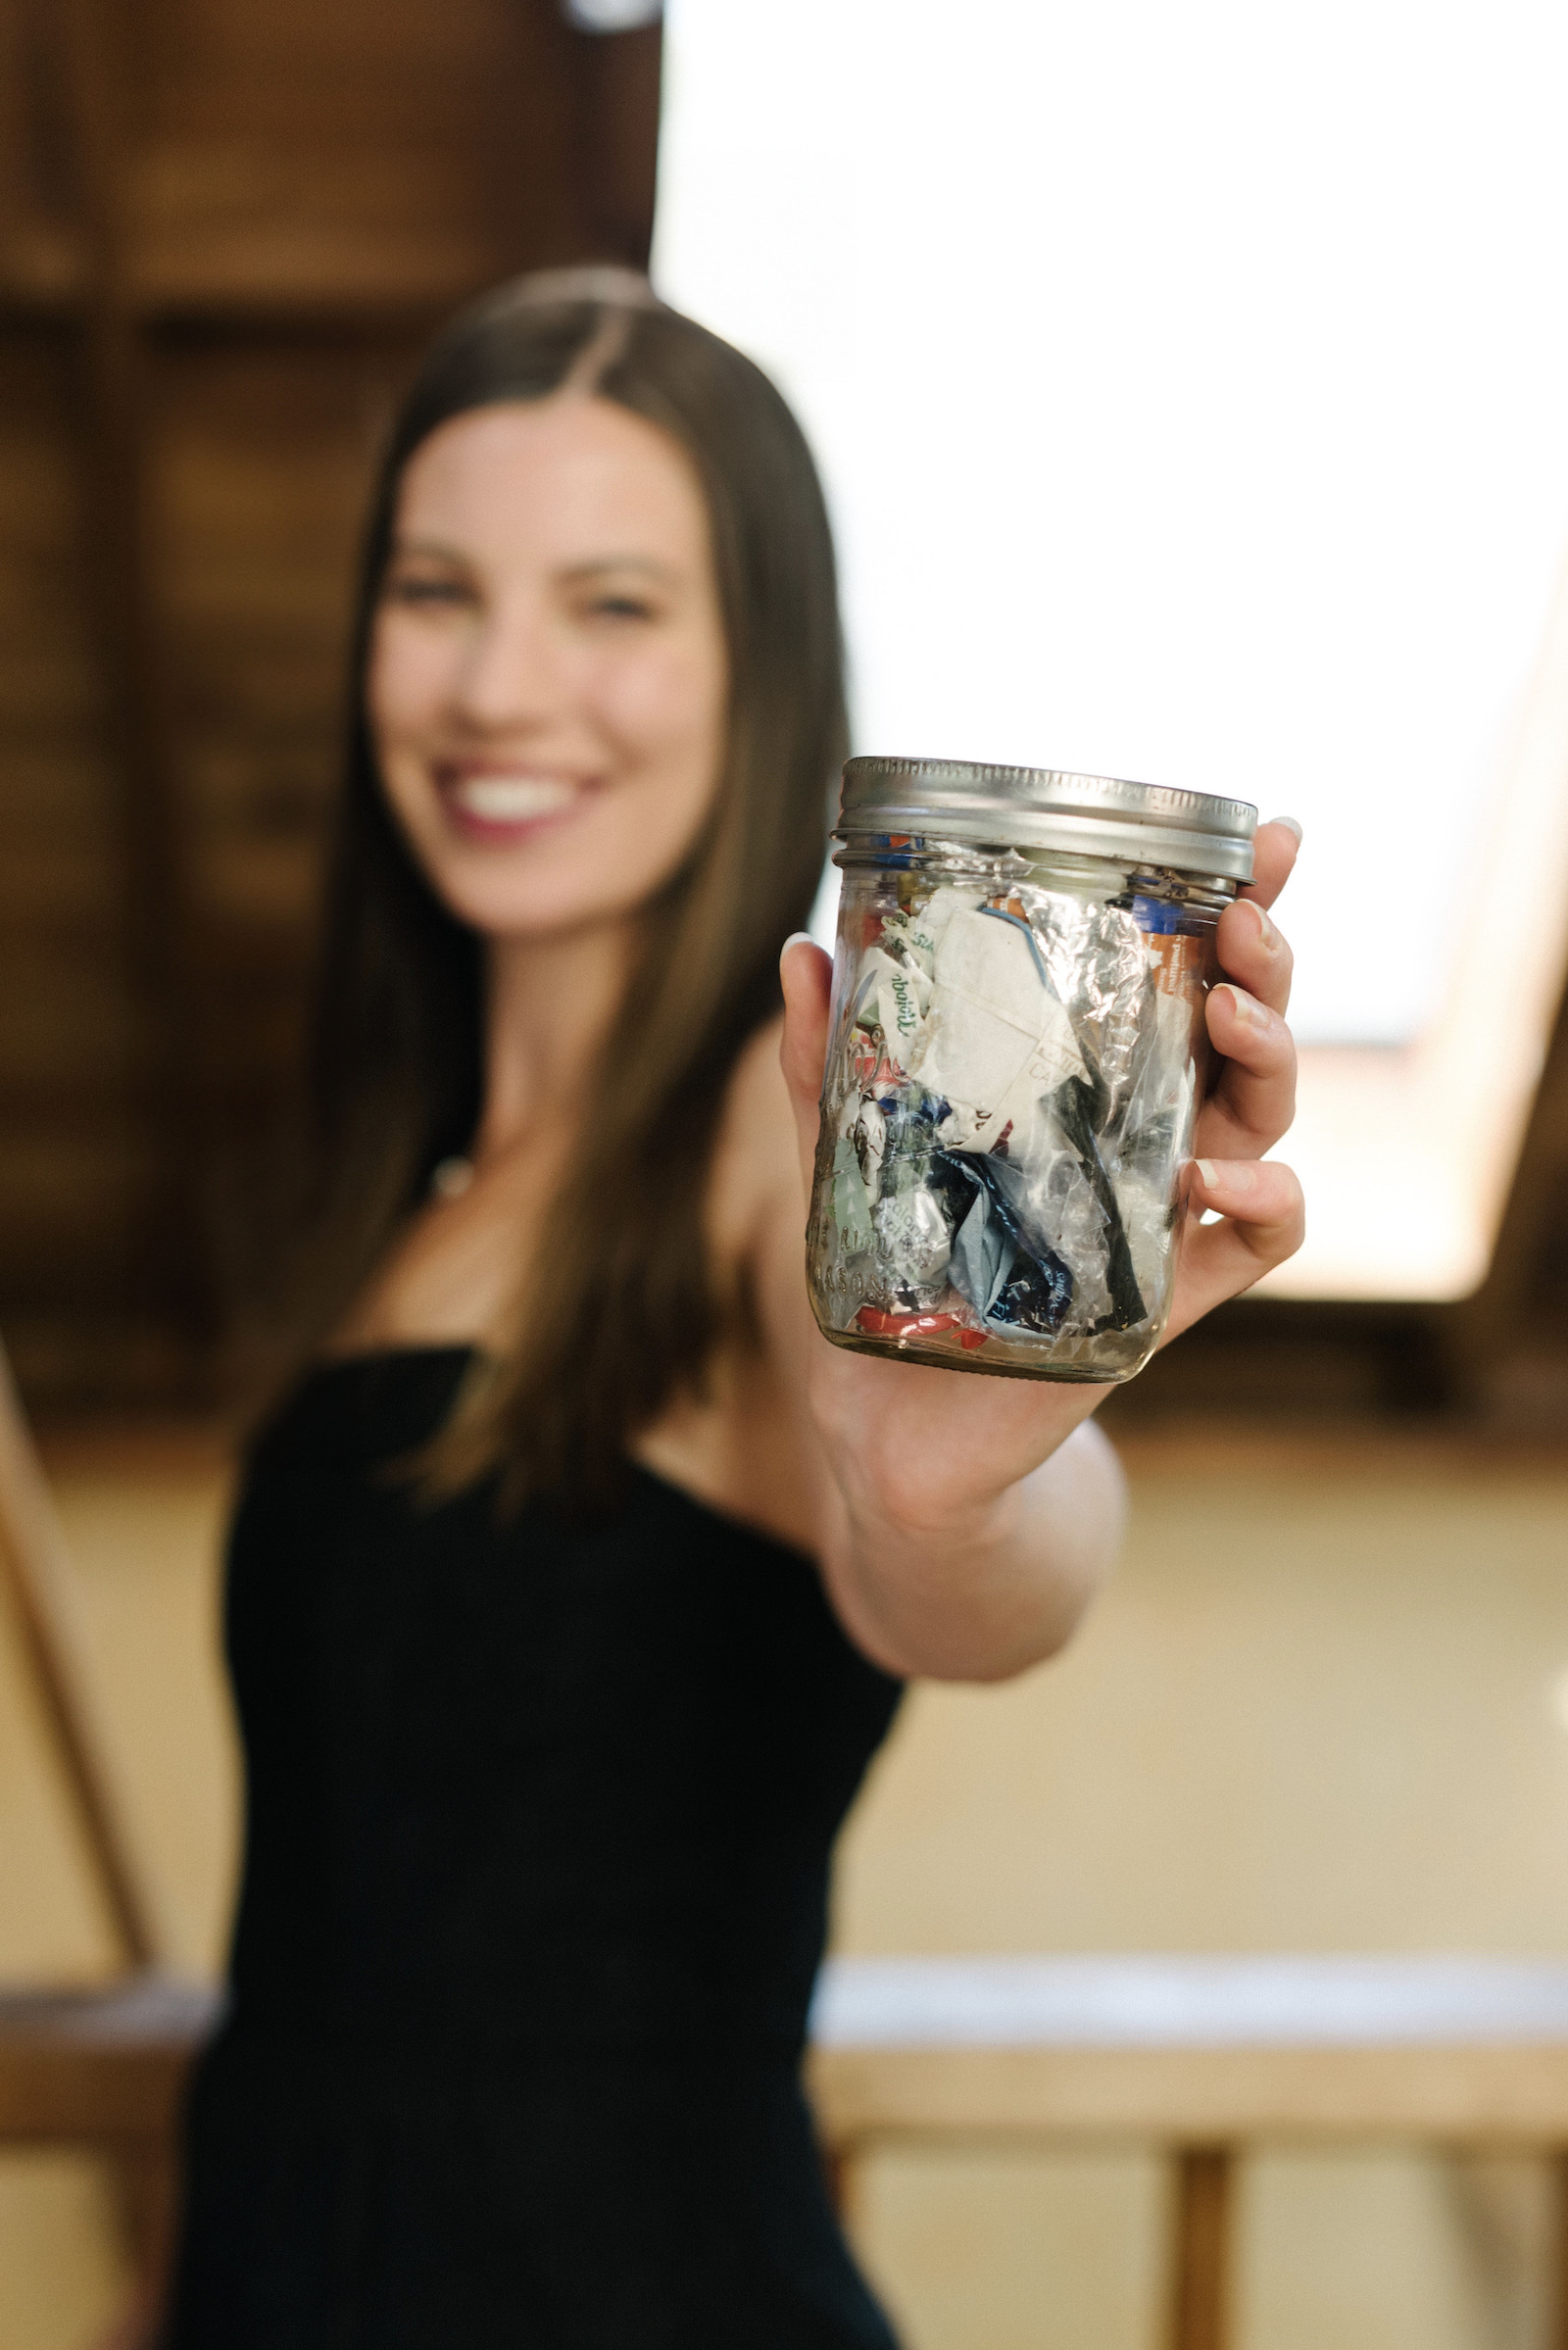 Woman holds a trash jar up to the camera